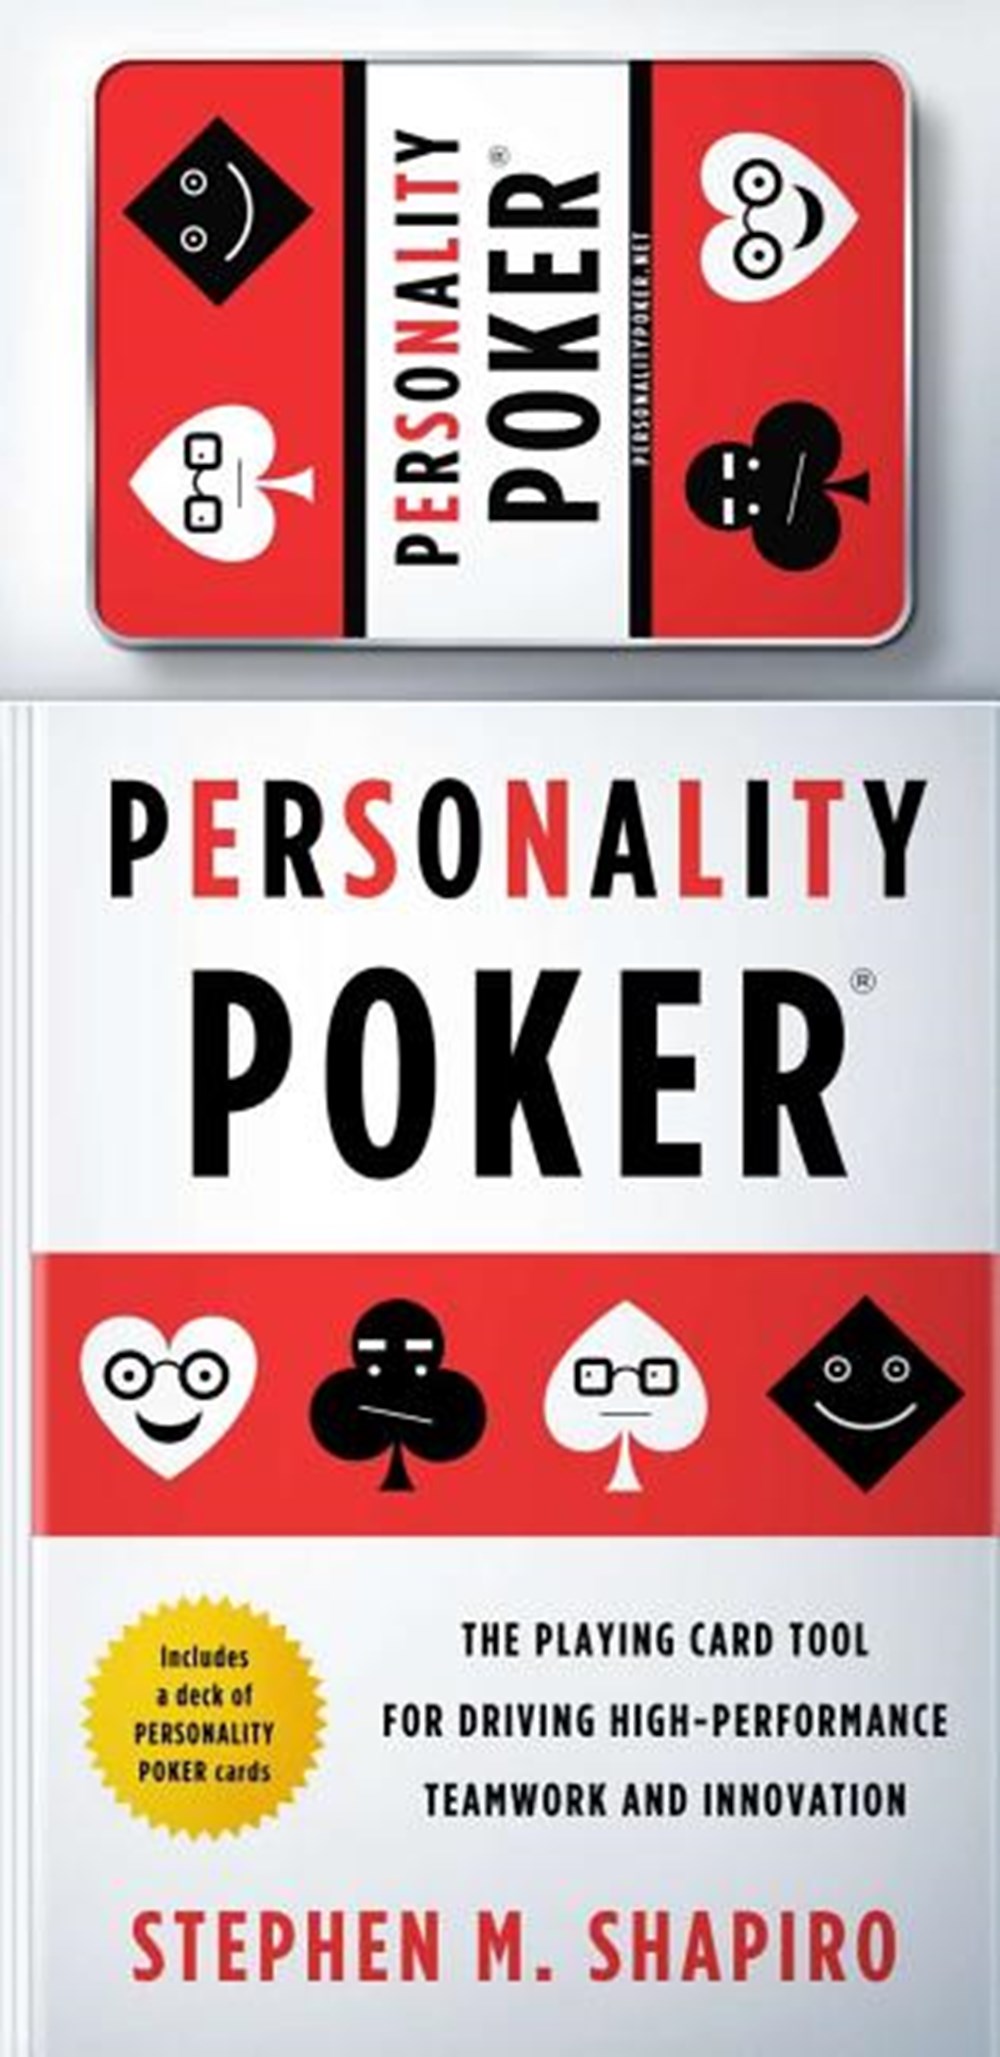 Personality Poker The Playing Card Tool for Driving High-Performance Teamwork and Innovation [With C